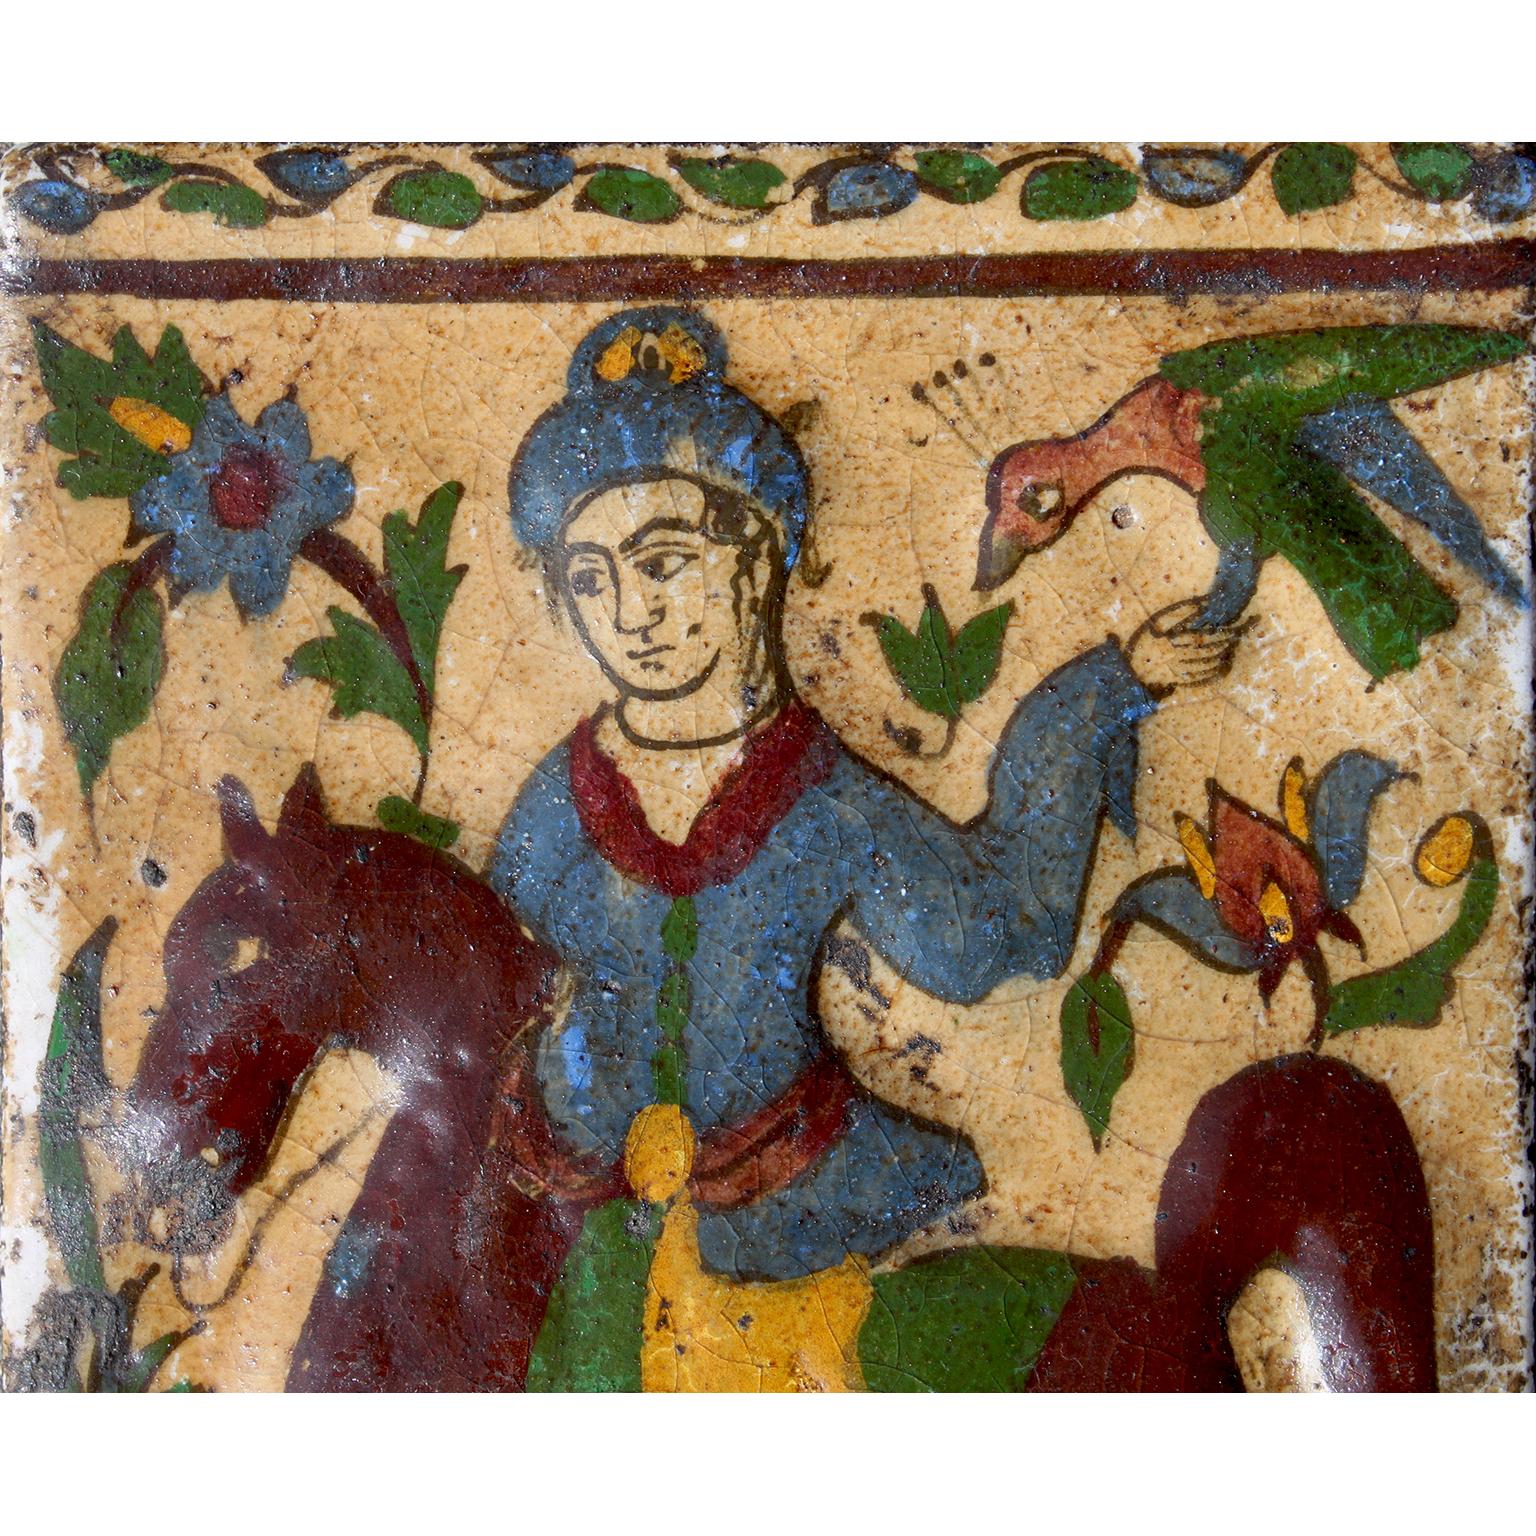 A Charming Persian Qajar Glazed Moulded Pottery Tile, depicting a falconer or Bazdar on horseback holding a falcon amongst flowers and leaves, in a yellow background, Tehran, North Persia. Actual age unknown, but probably between 1880 and